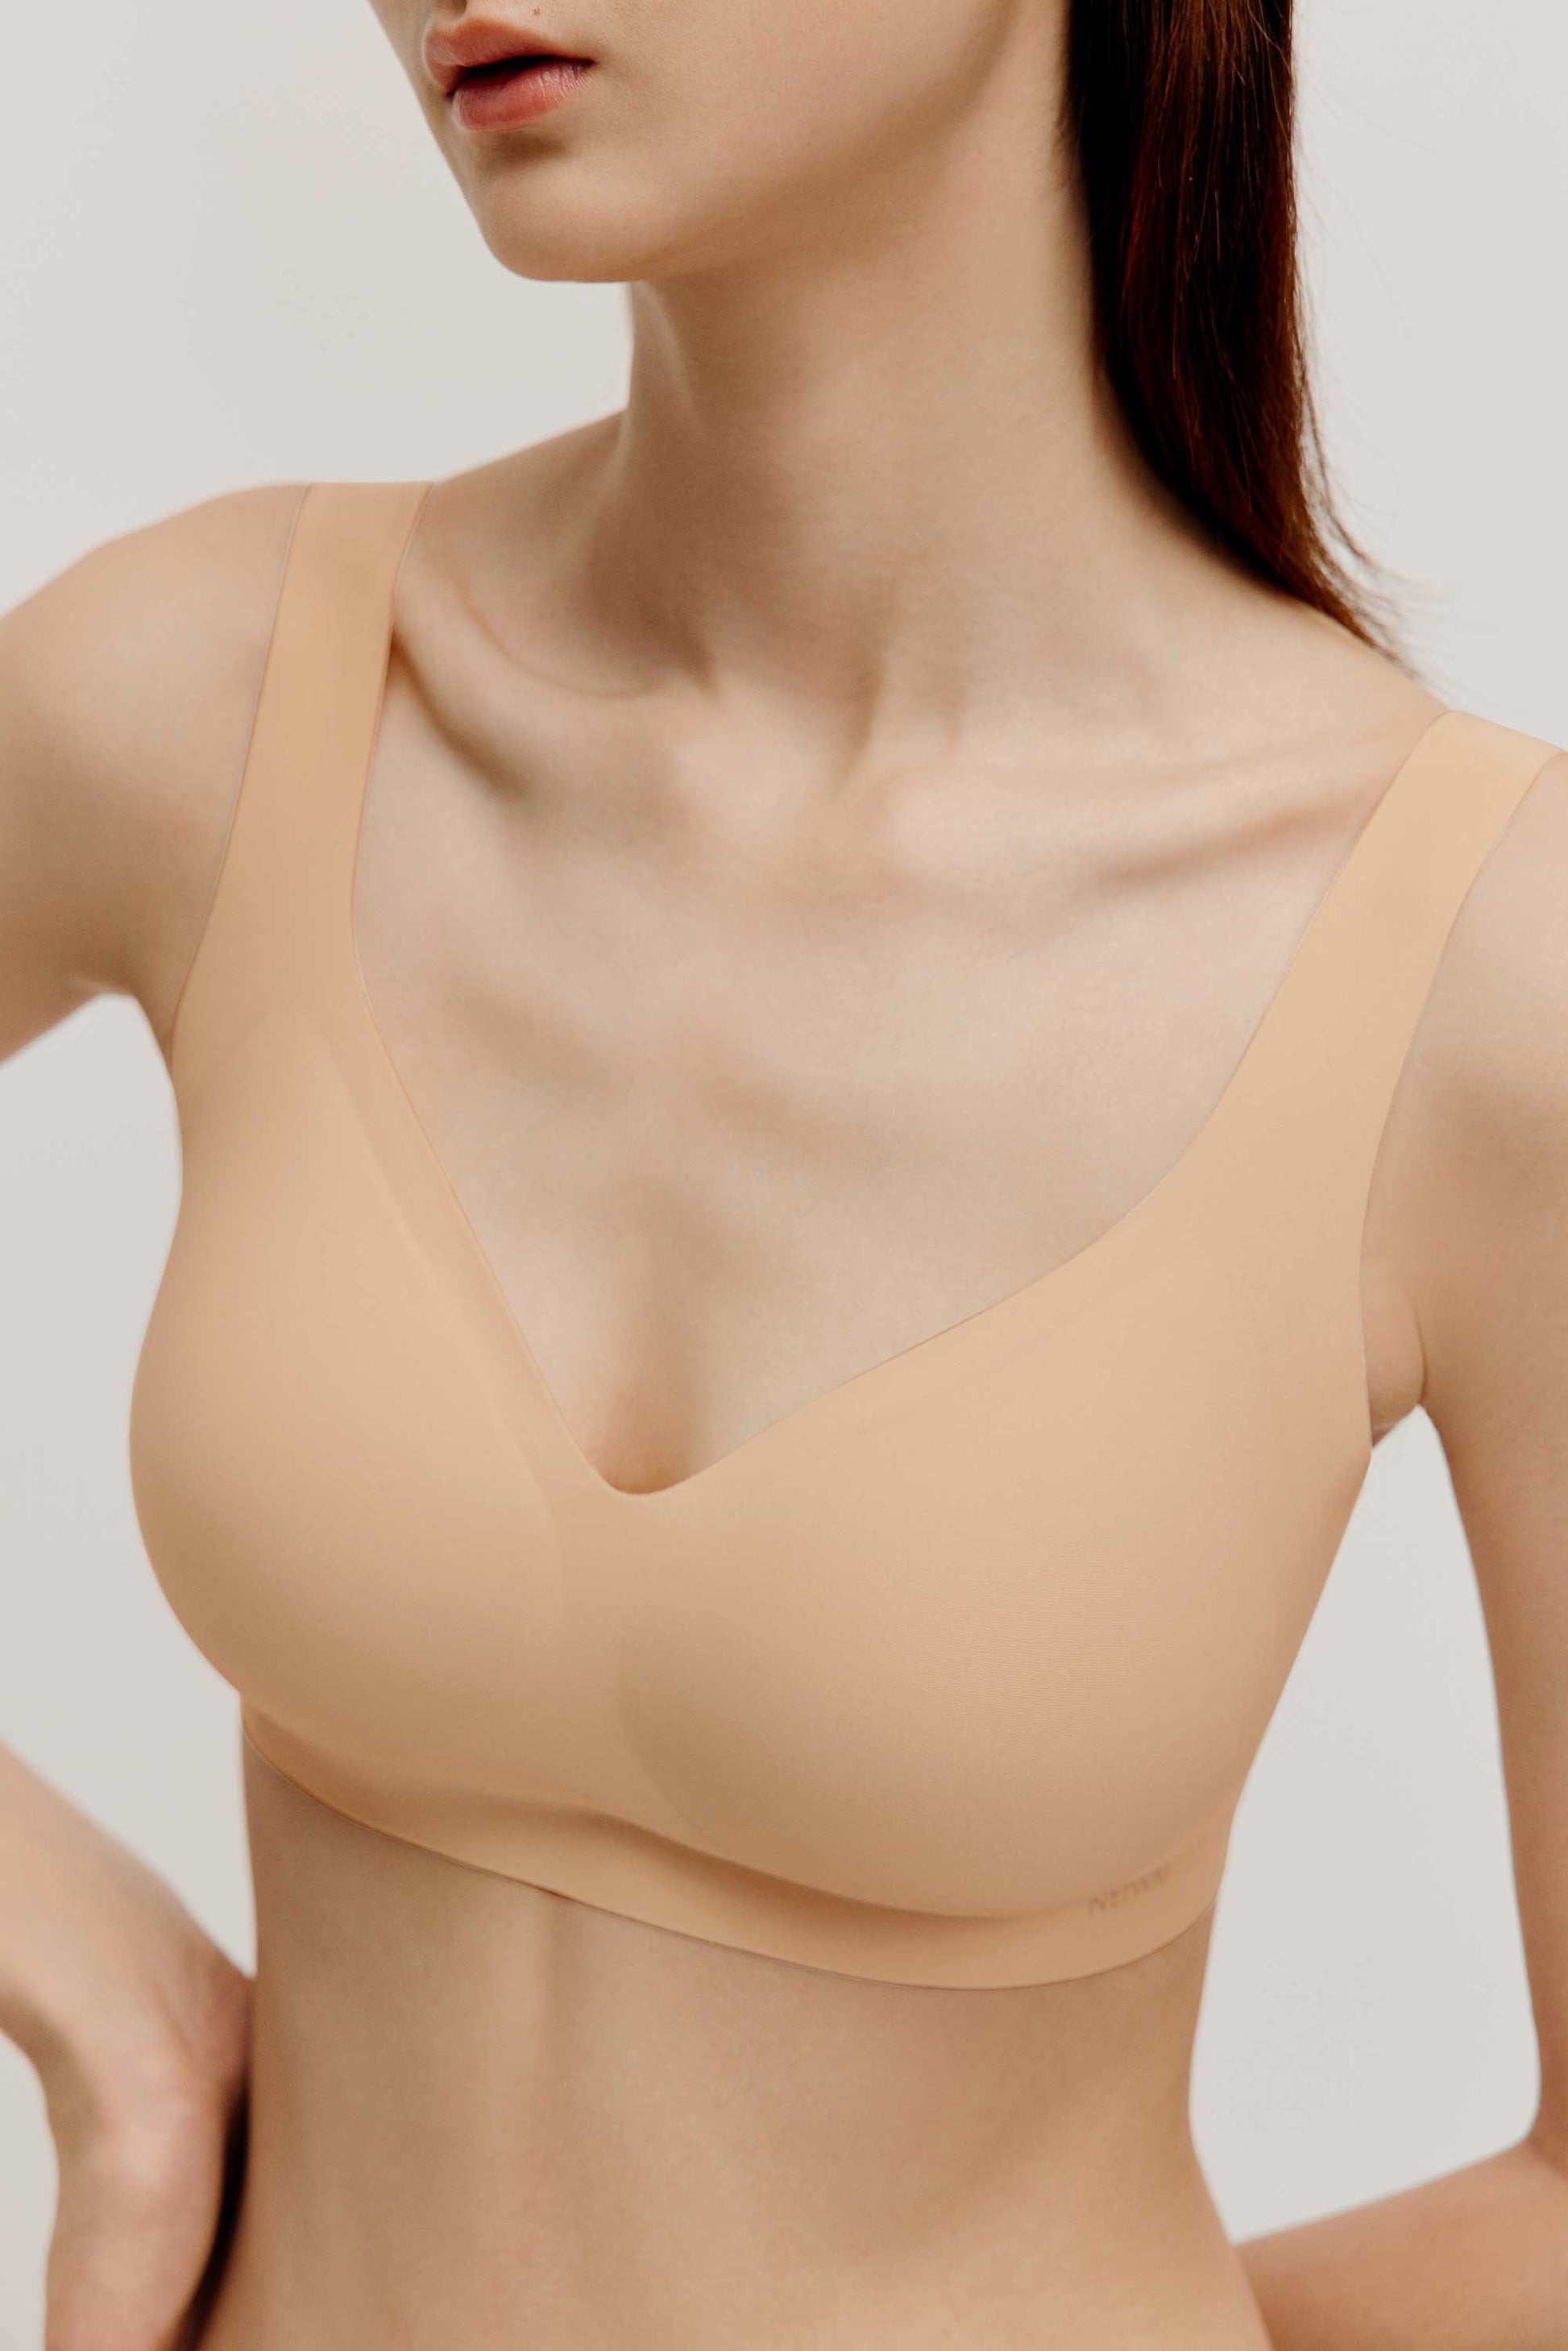 These 'Cloud-Like' Neiwai Wireless Bras Are on Sale with This